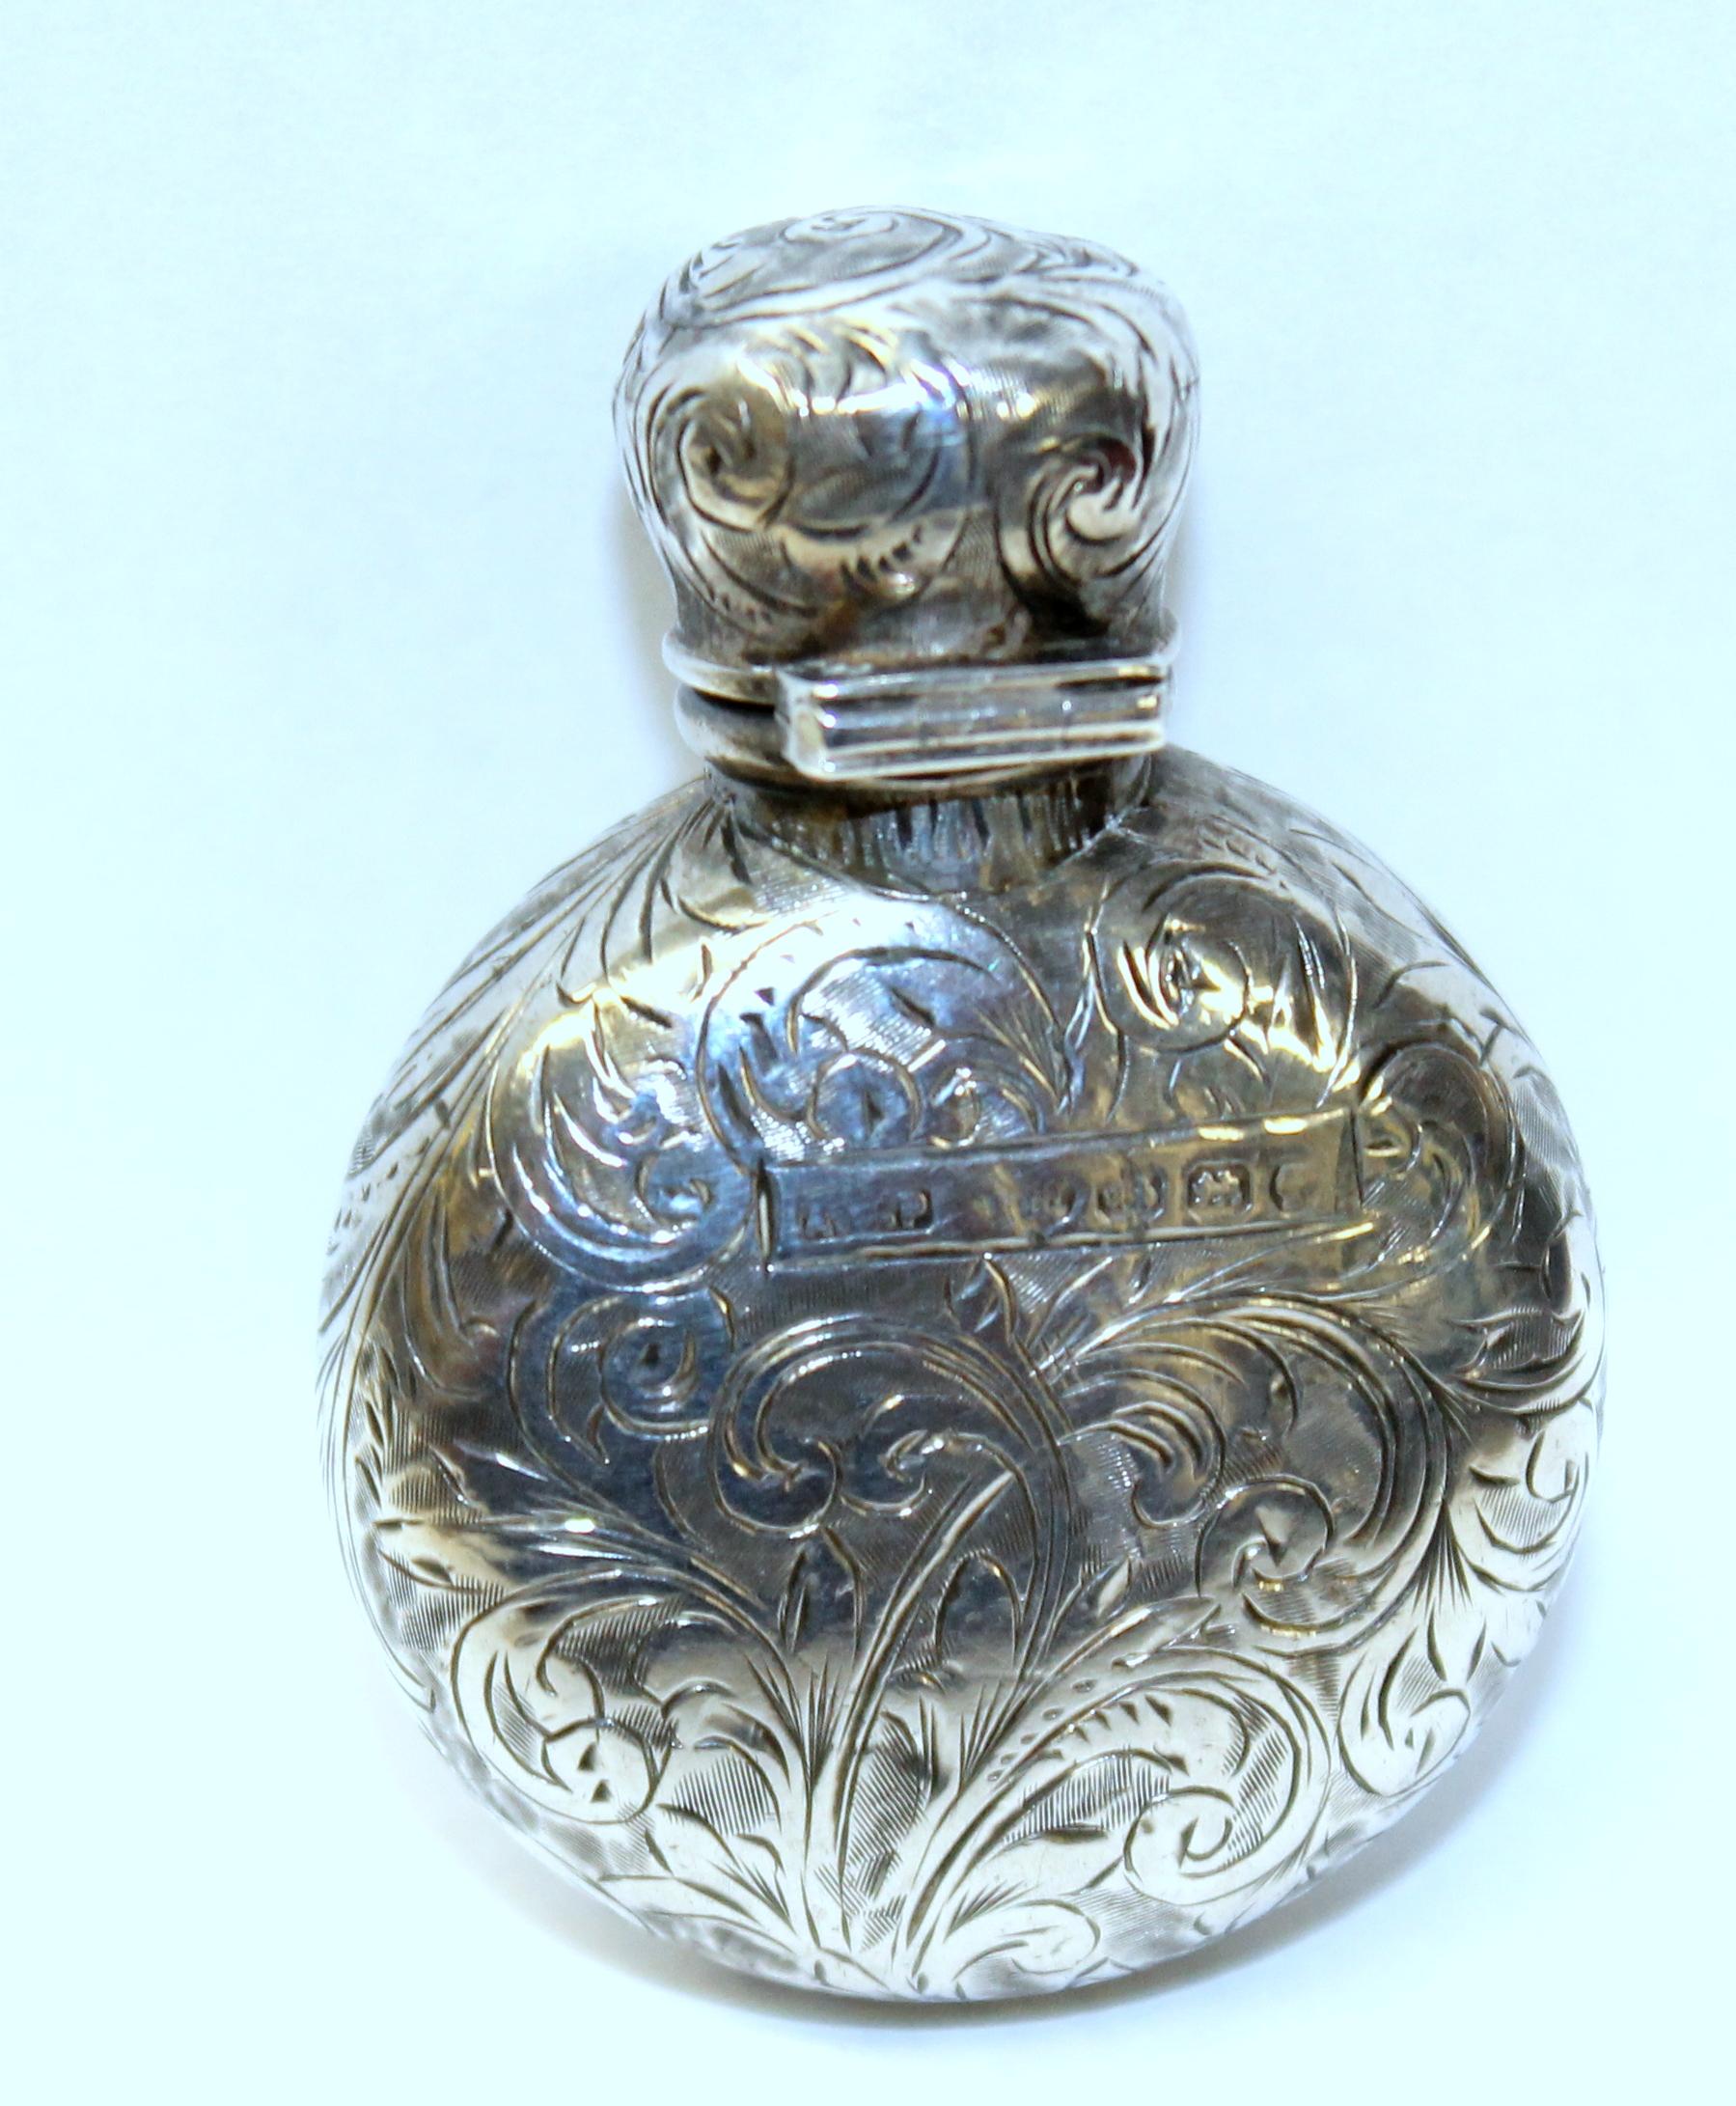 Antique English Victorian Hallmarked Sterling Silver Scent/Perfume Bottle 1